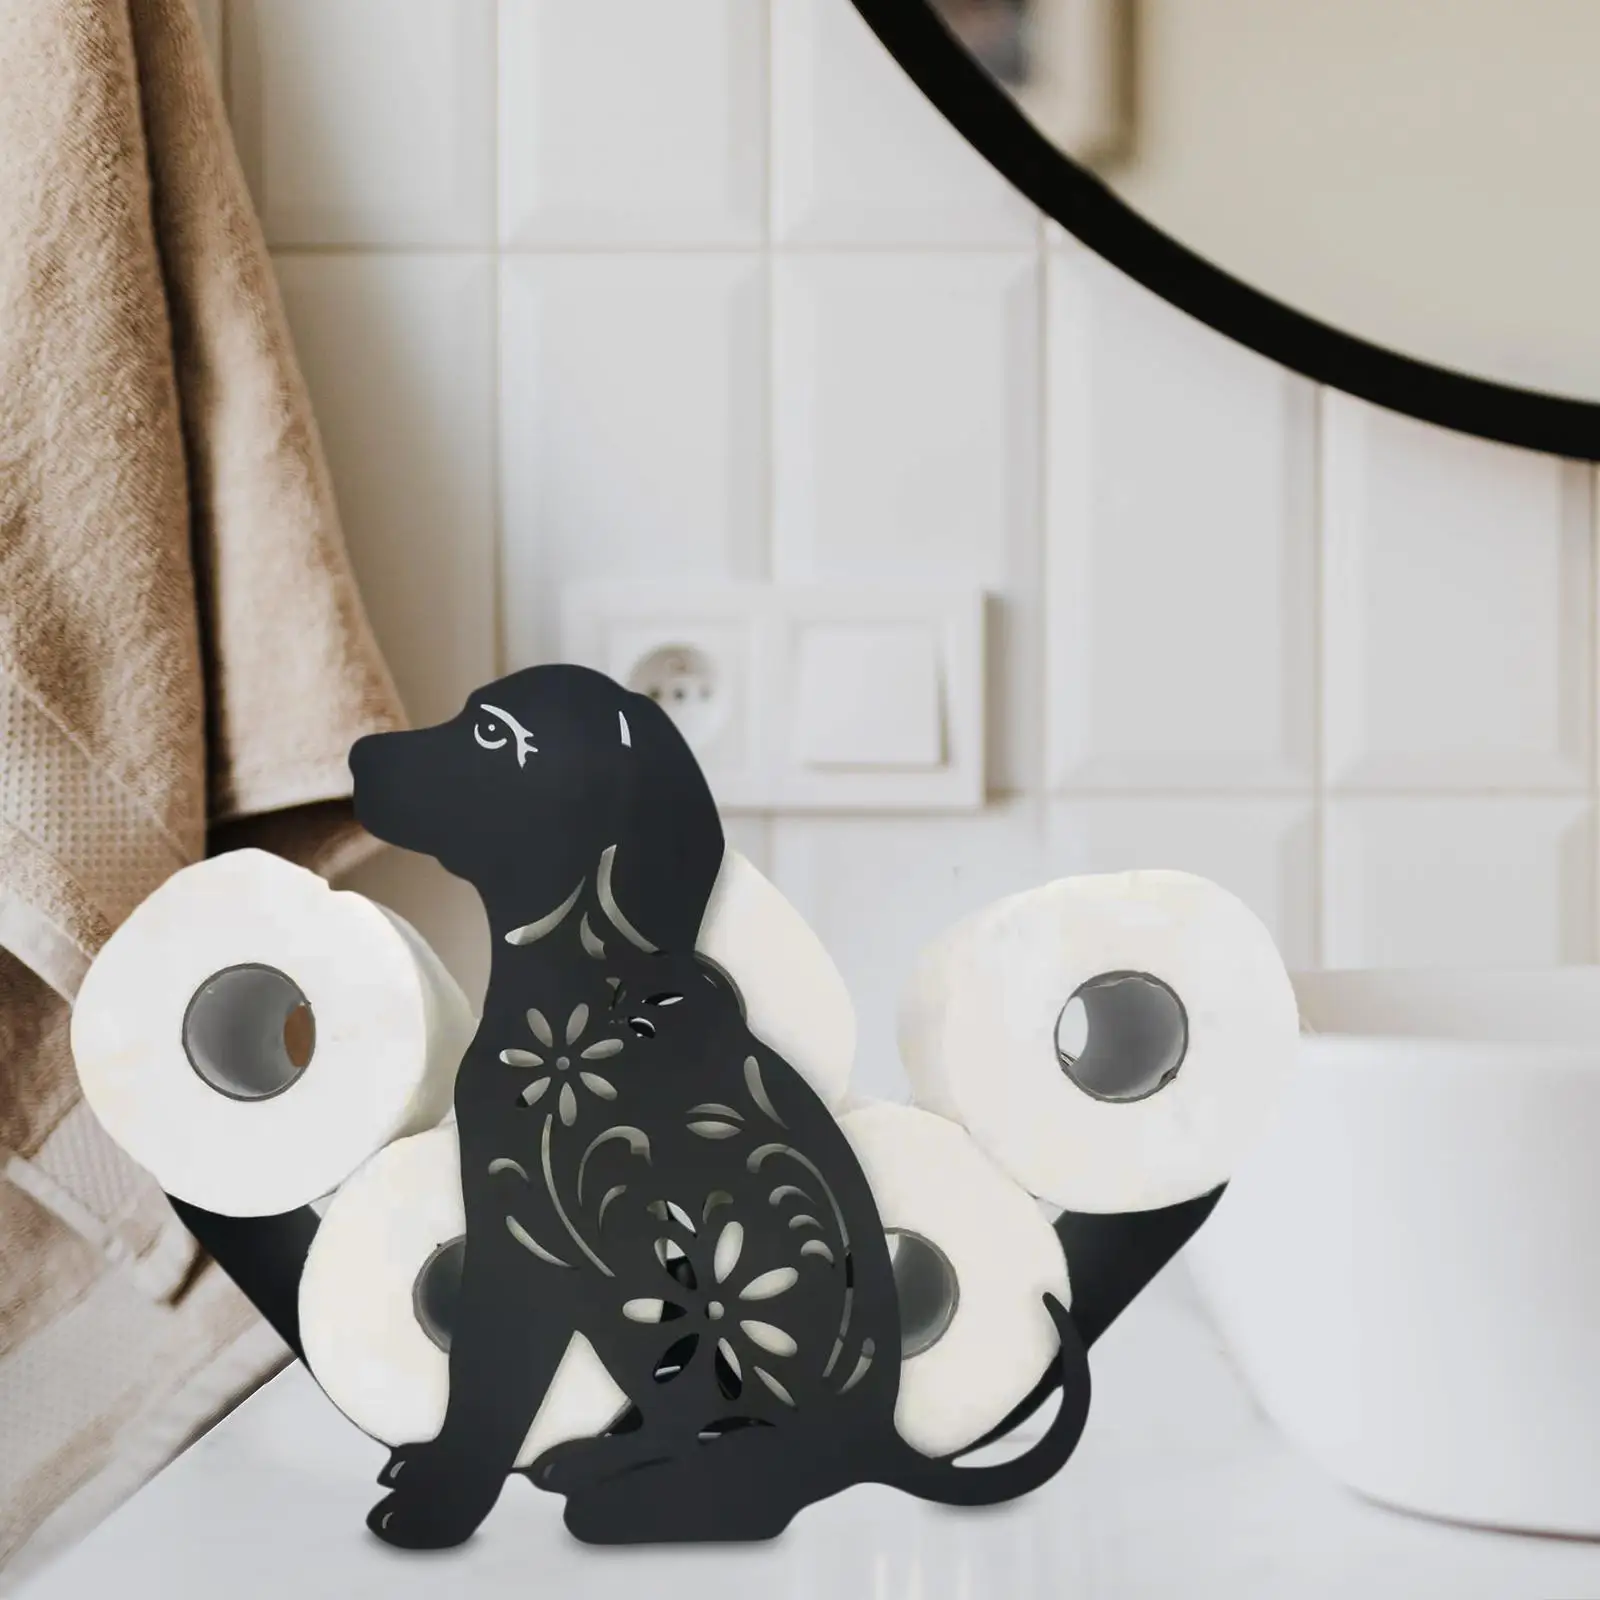 Creative  Holder, Bathroom Tissue Storage Iron Hollow Out Animals Model Roll Paper Rack for Home Washroom Crafts Decoration